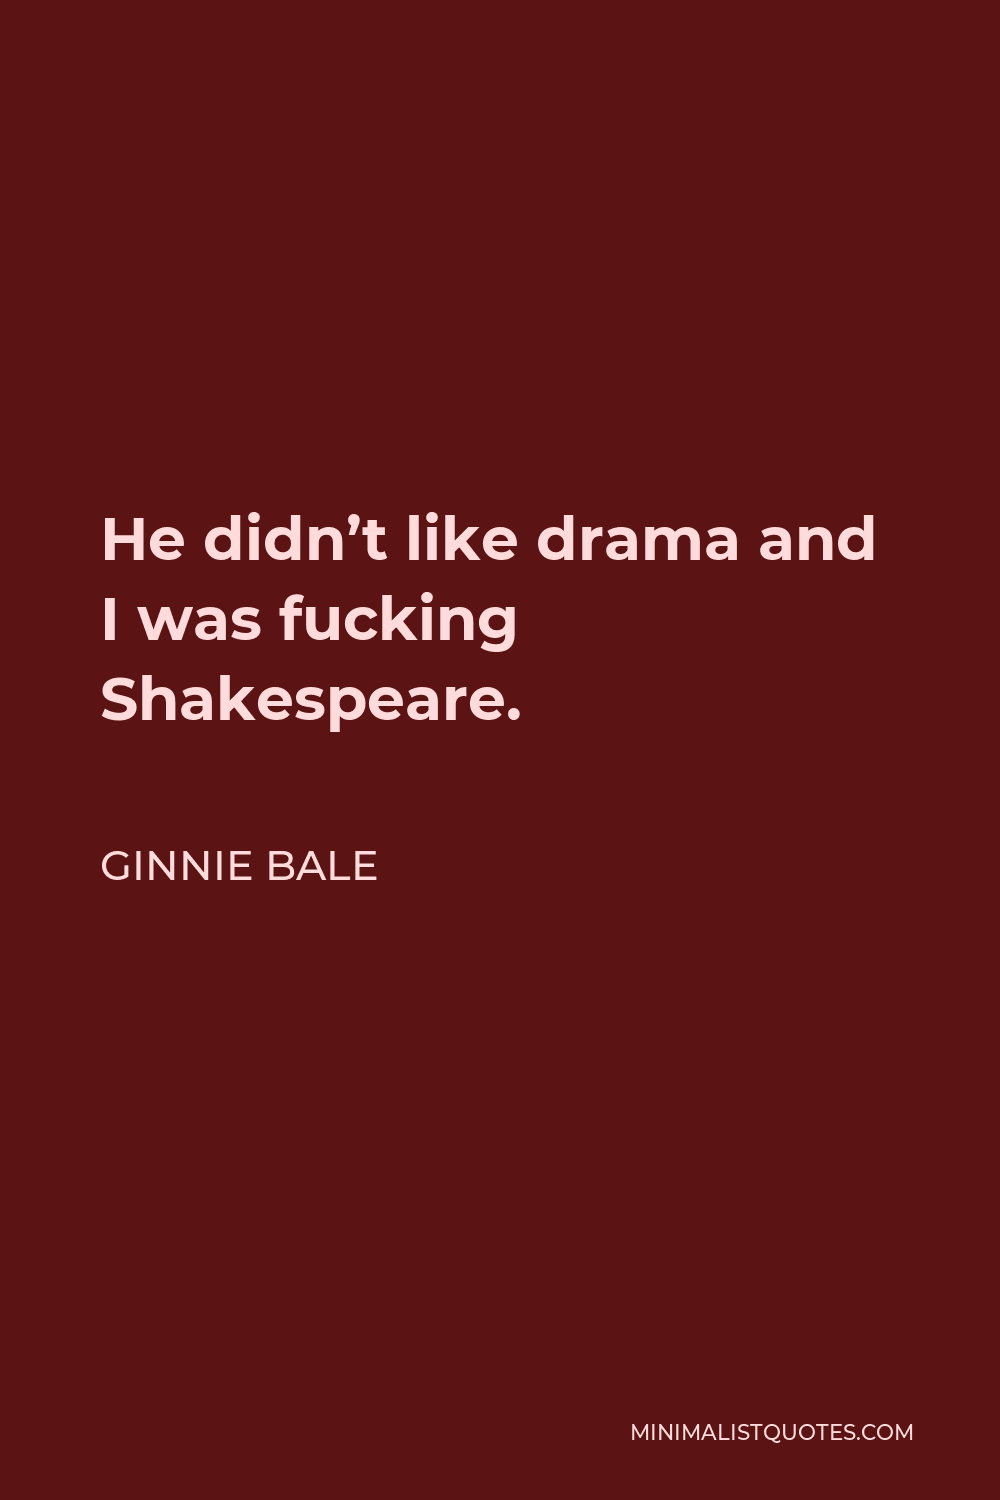 Ginnie Bale Quote - He didn’t like drama and I was fucking Shakespeare.